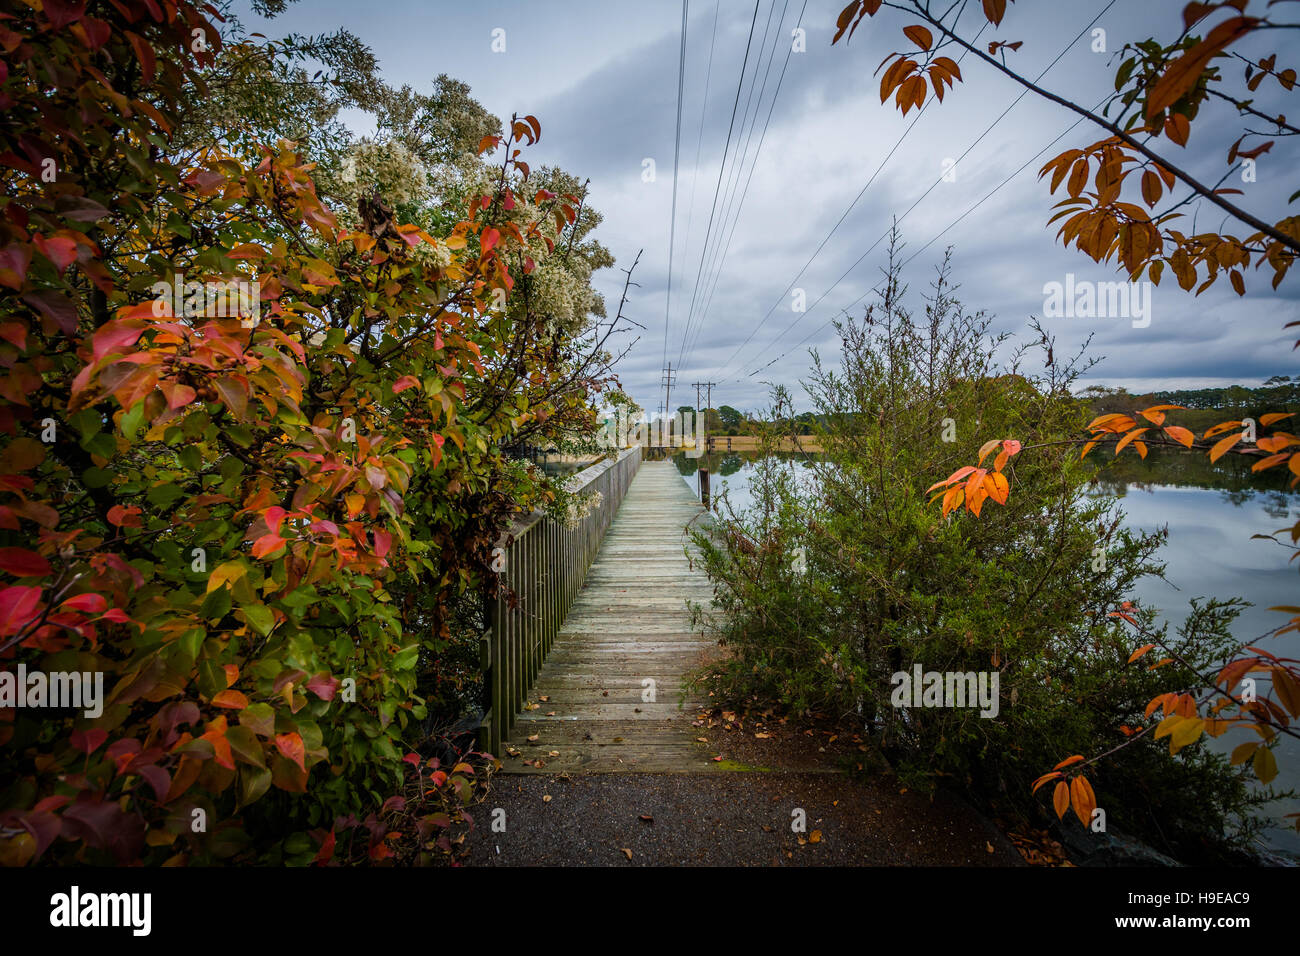 Autumn color and pier at Oak Creek Landing, in Newcomb, near St. Michaels, Maryland. Stock Photo